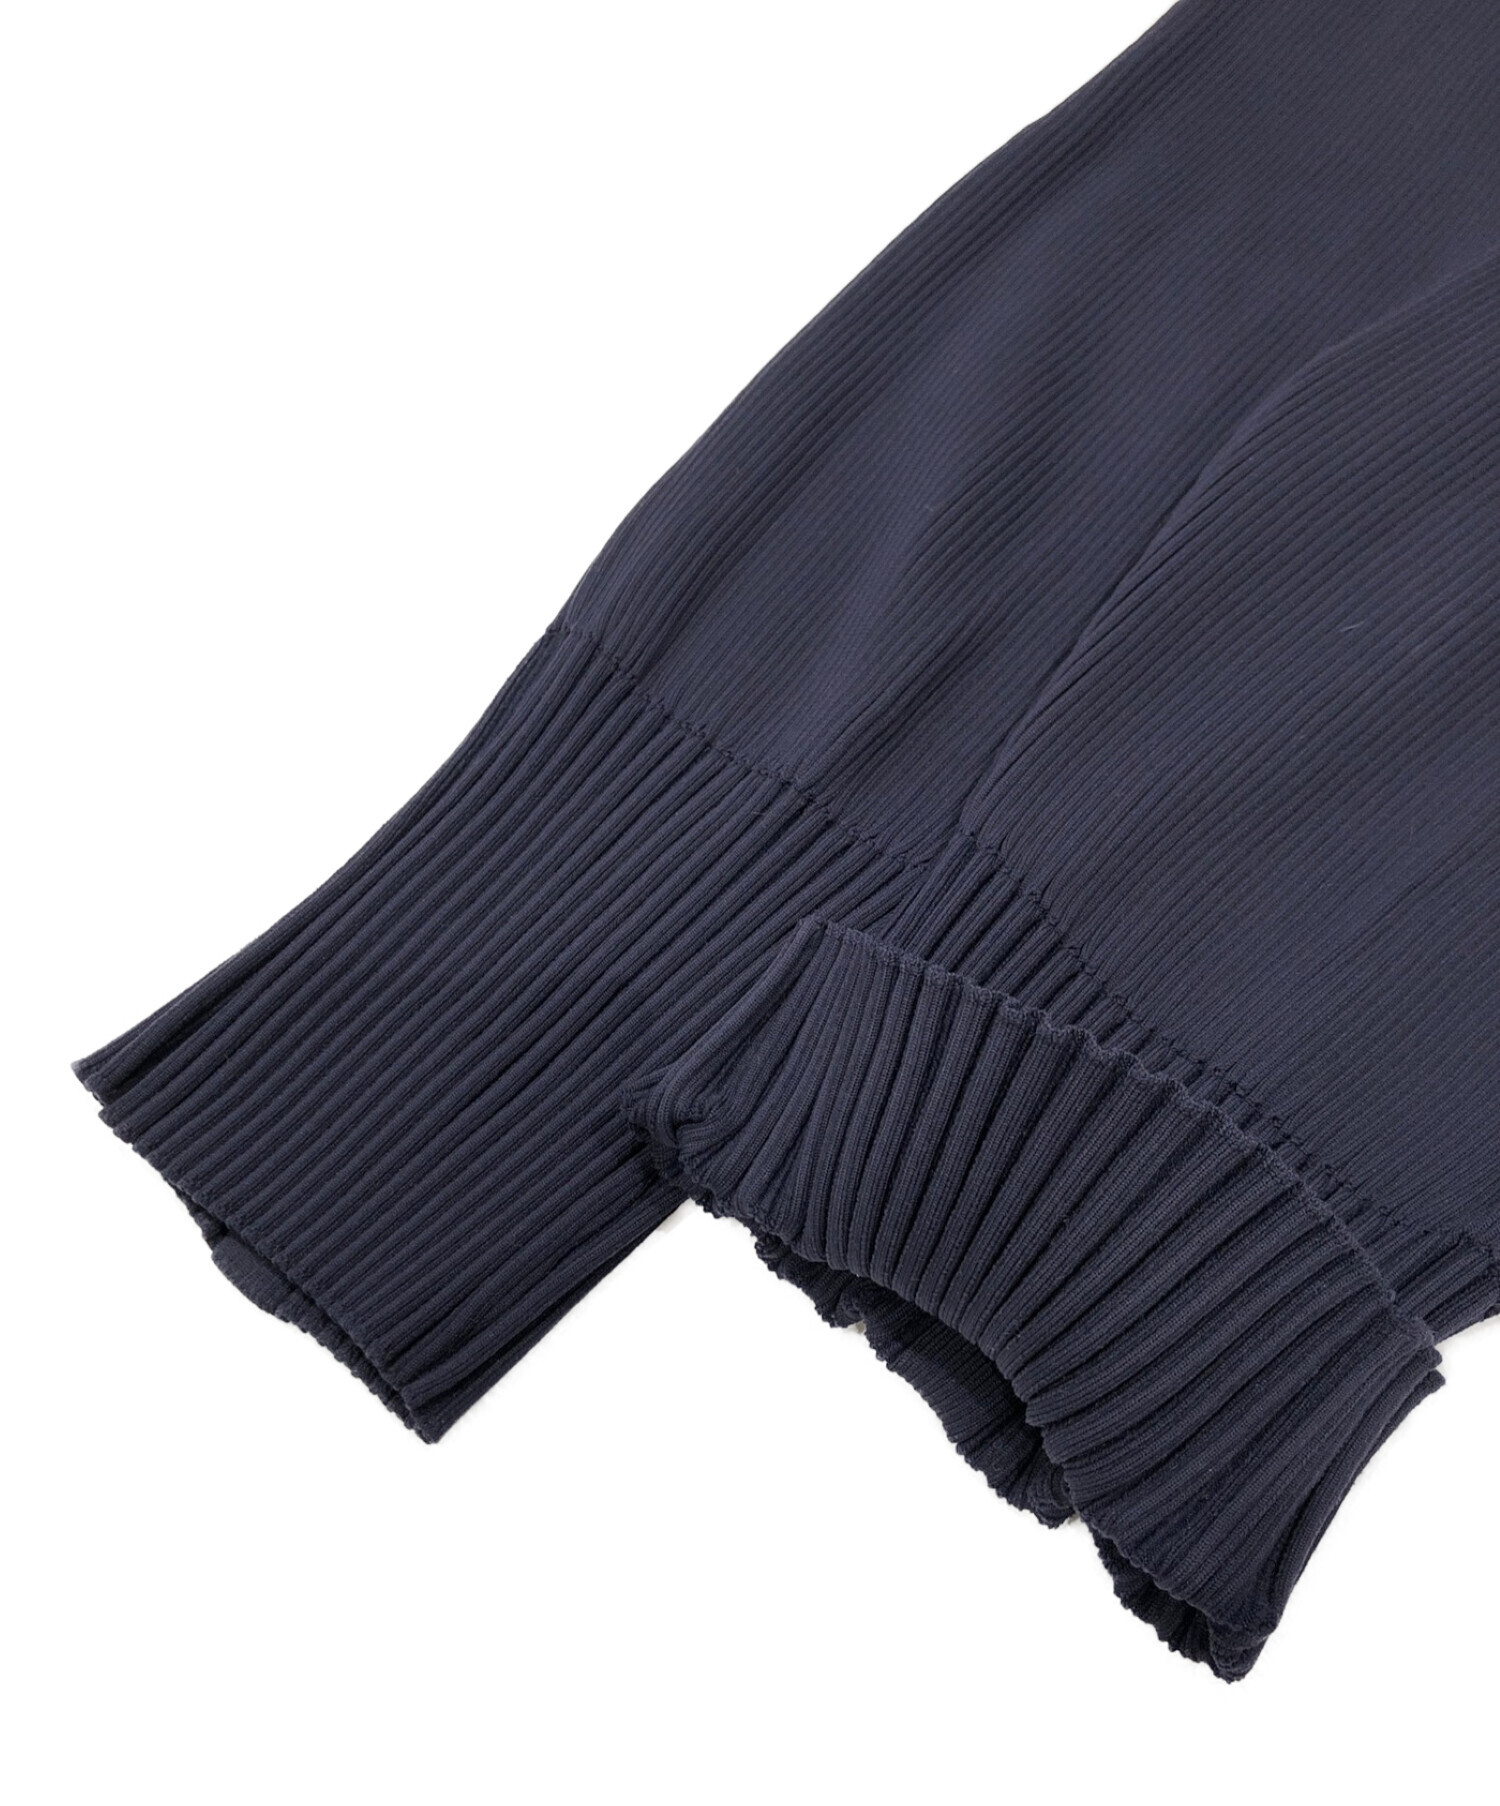 CFCL FLUTED PANTS